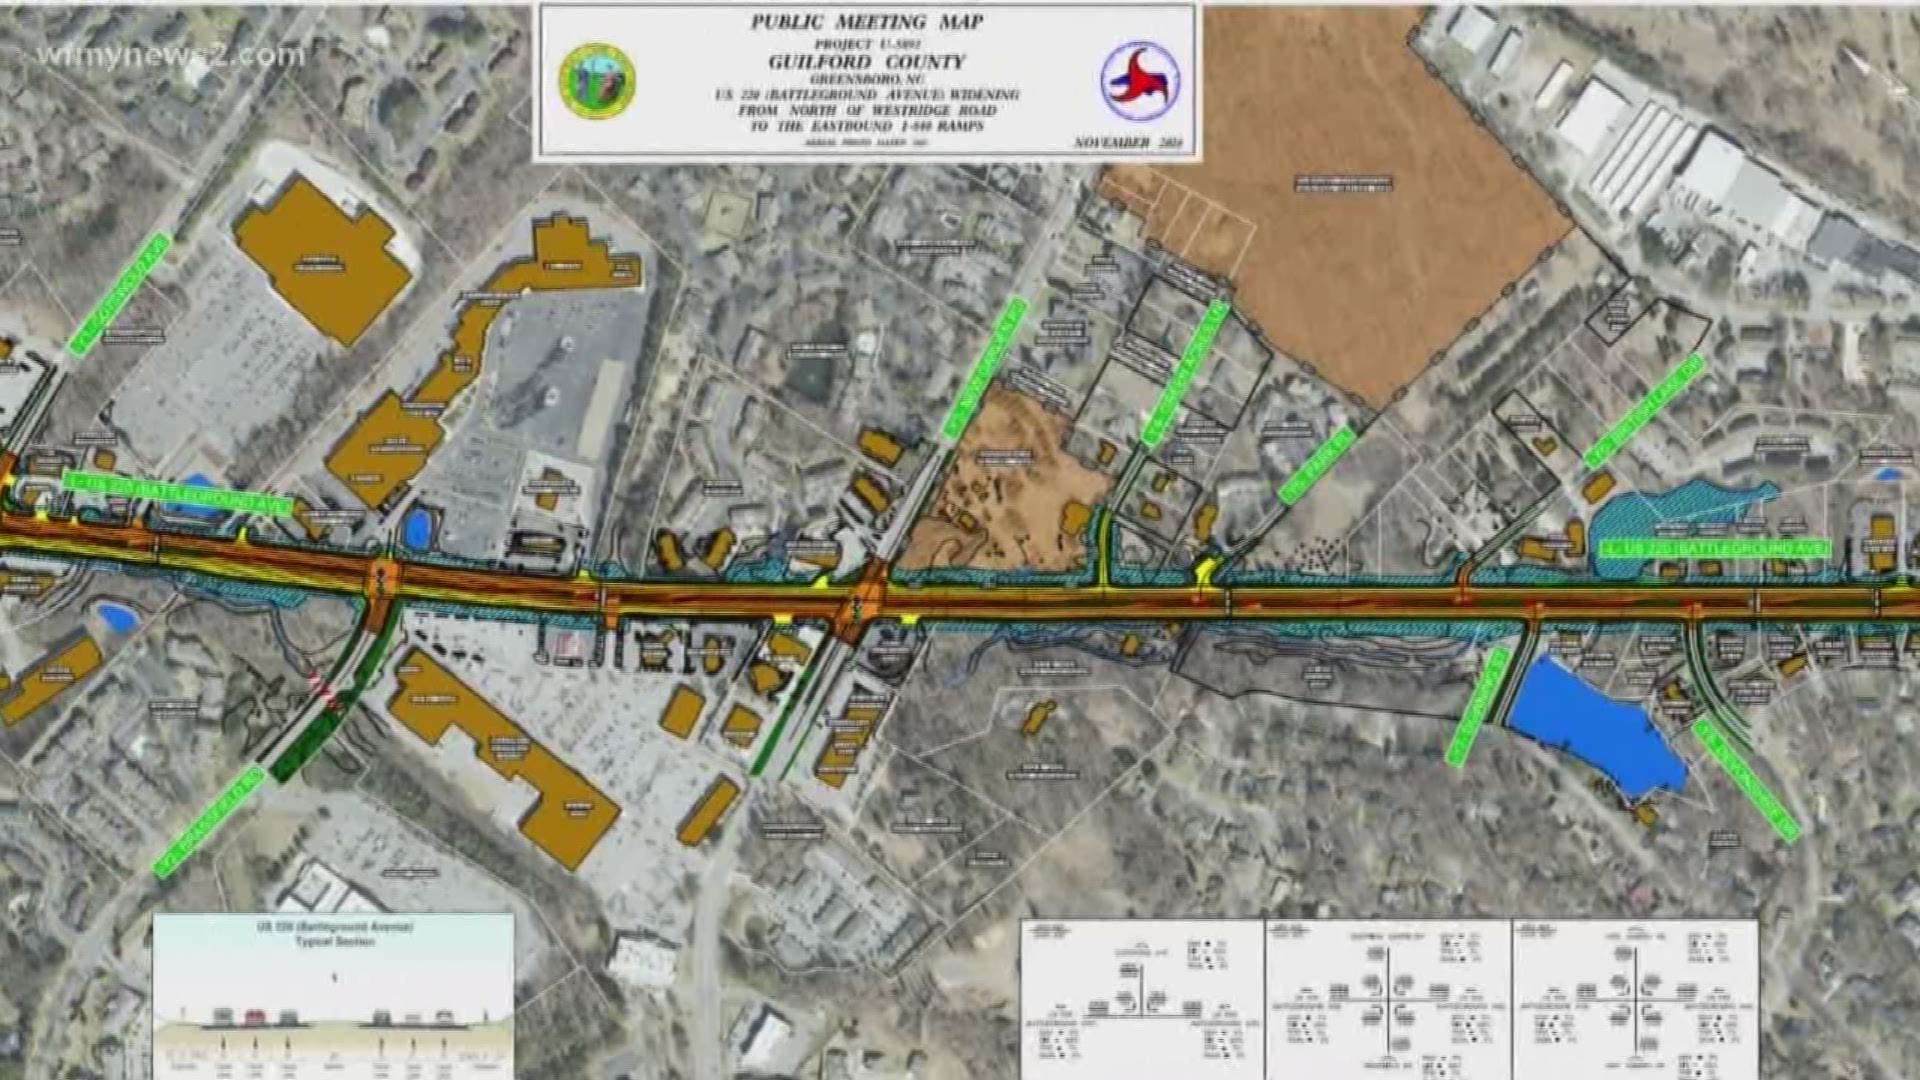 WFMY News 2 is getting a first look at big plans to expand the highly-traveled Battleground Avenue.